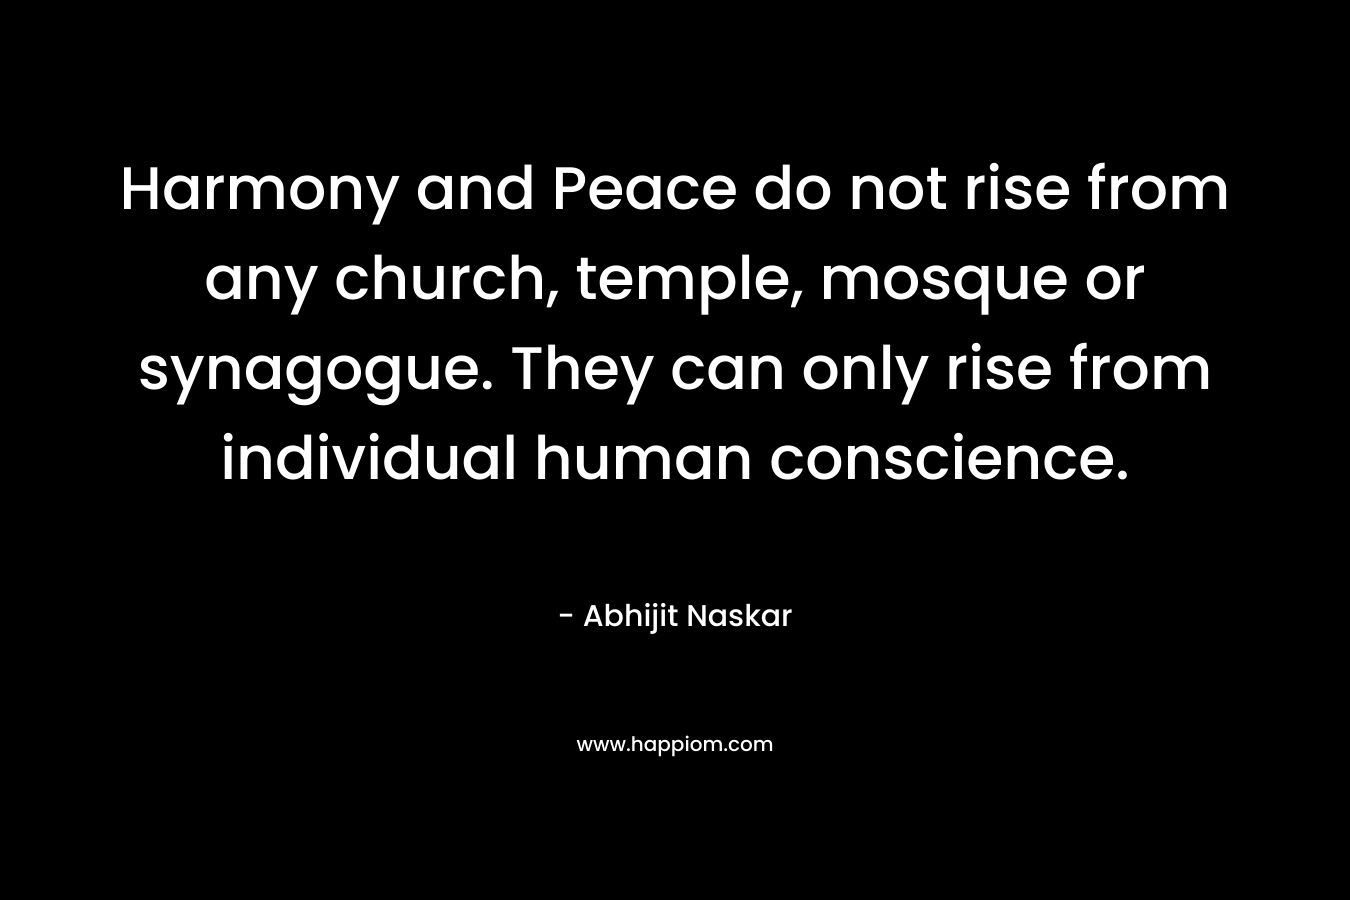 Harmony and Peace do not rise from any church, temple, mosque or synagogue. They can only rise from individual human conscience. – Abhijit Naskar